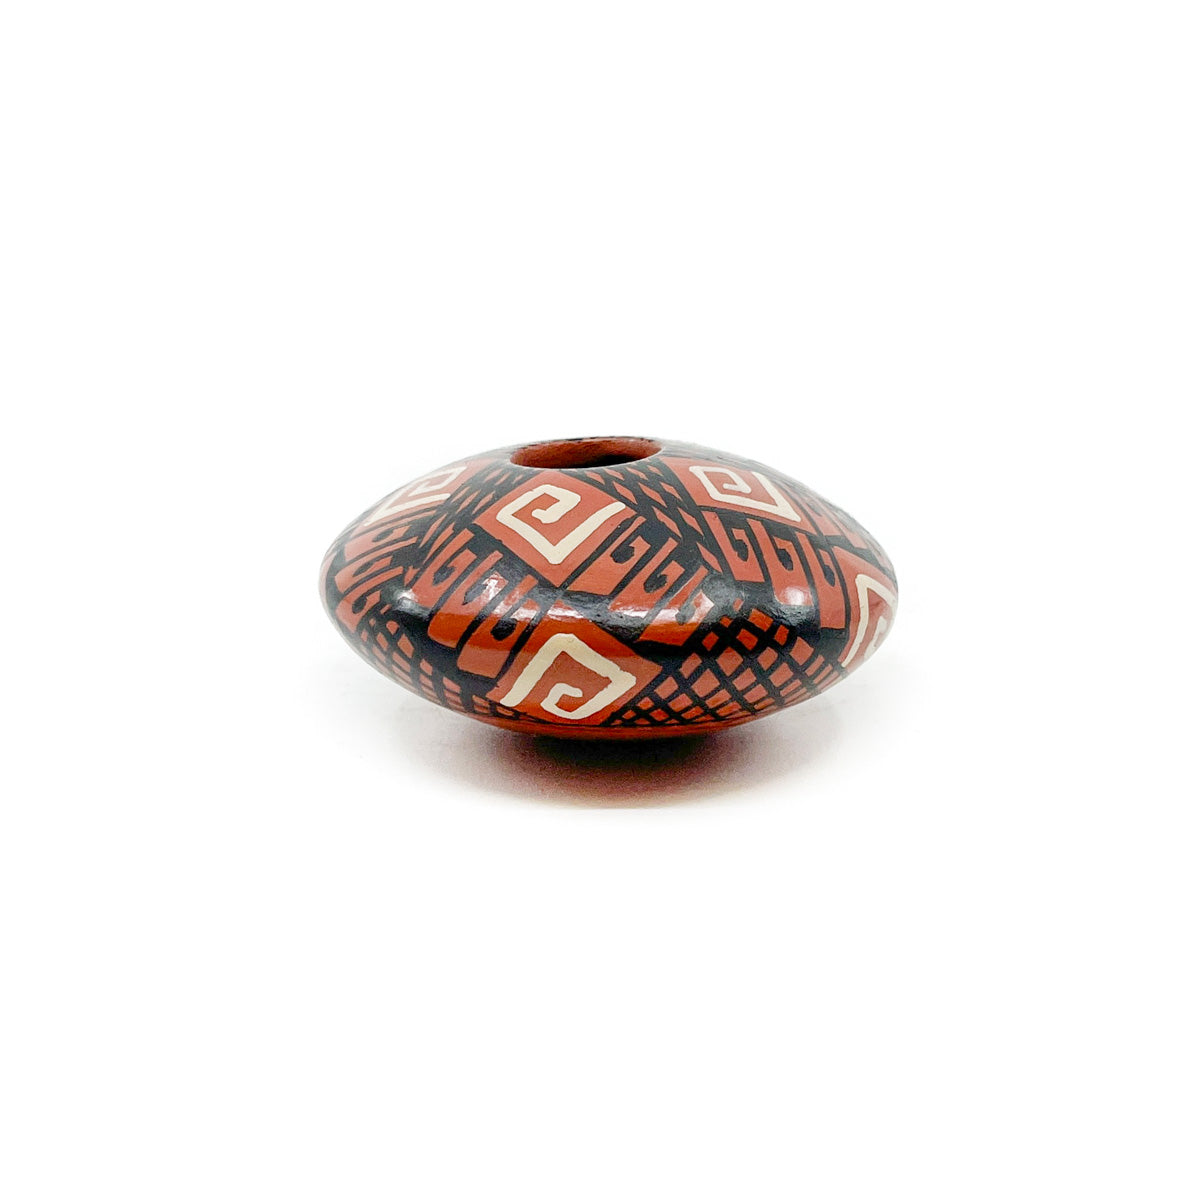 Mini Seed Pot with  White & Black Geometric Designs on Red Clay